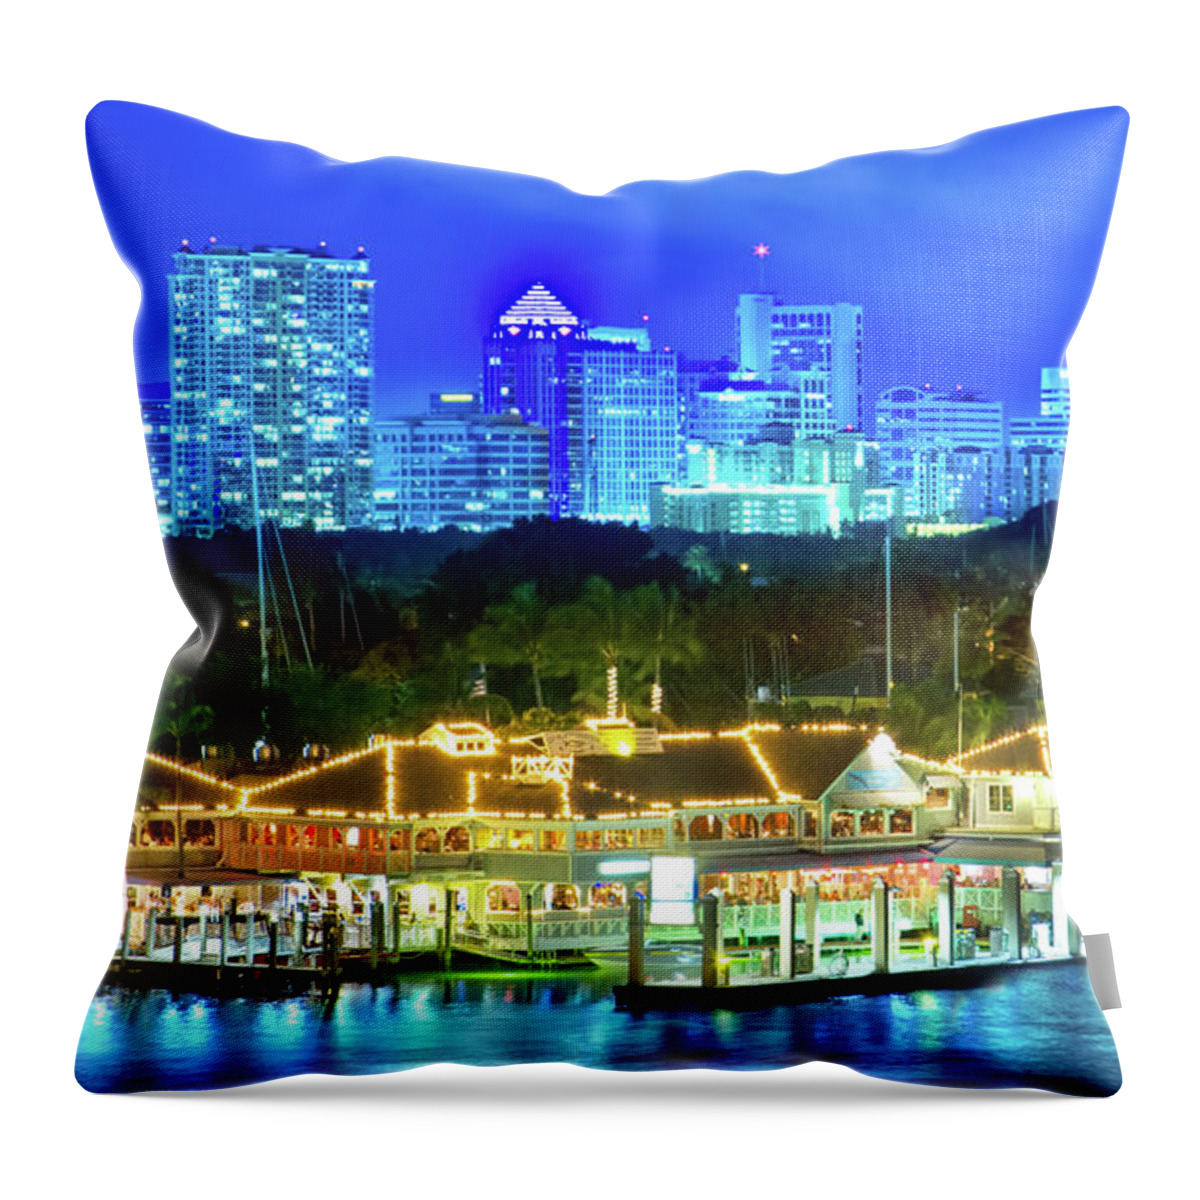 Fort Lauderdale Throw Pillow featuring the photograph 15th Street Fisheries by Mark Andrew Thomas